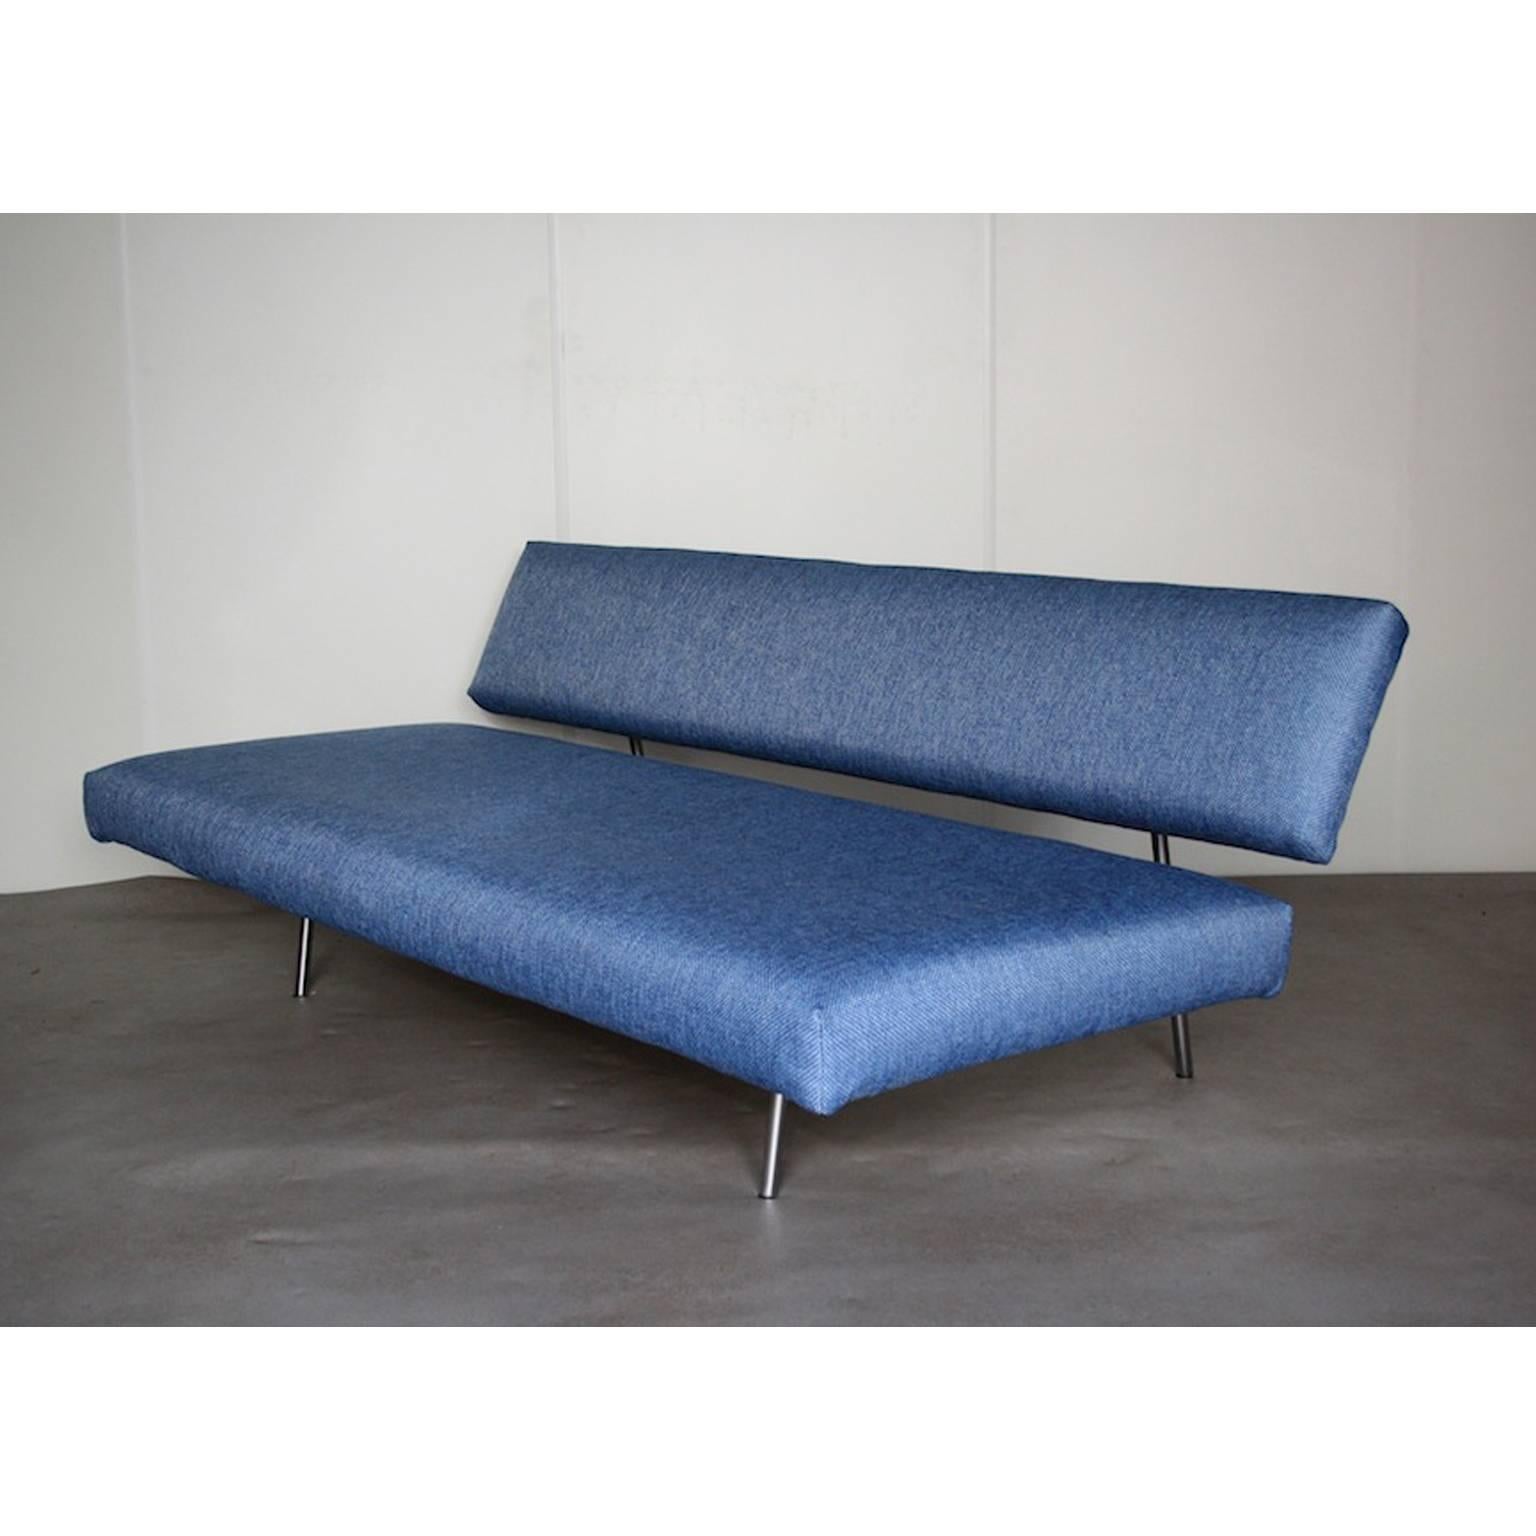 BR02 sofa that can be transformed into a daybed by Martin Visser.

Visser designed this sofa in 1958 when he was working for Dutch furniture manufacturer ’t Spectrum. He was one of the leading Dutch designers of the Mid-Century.

The daybed